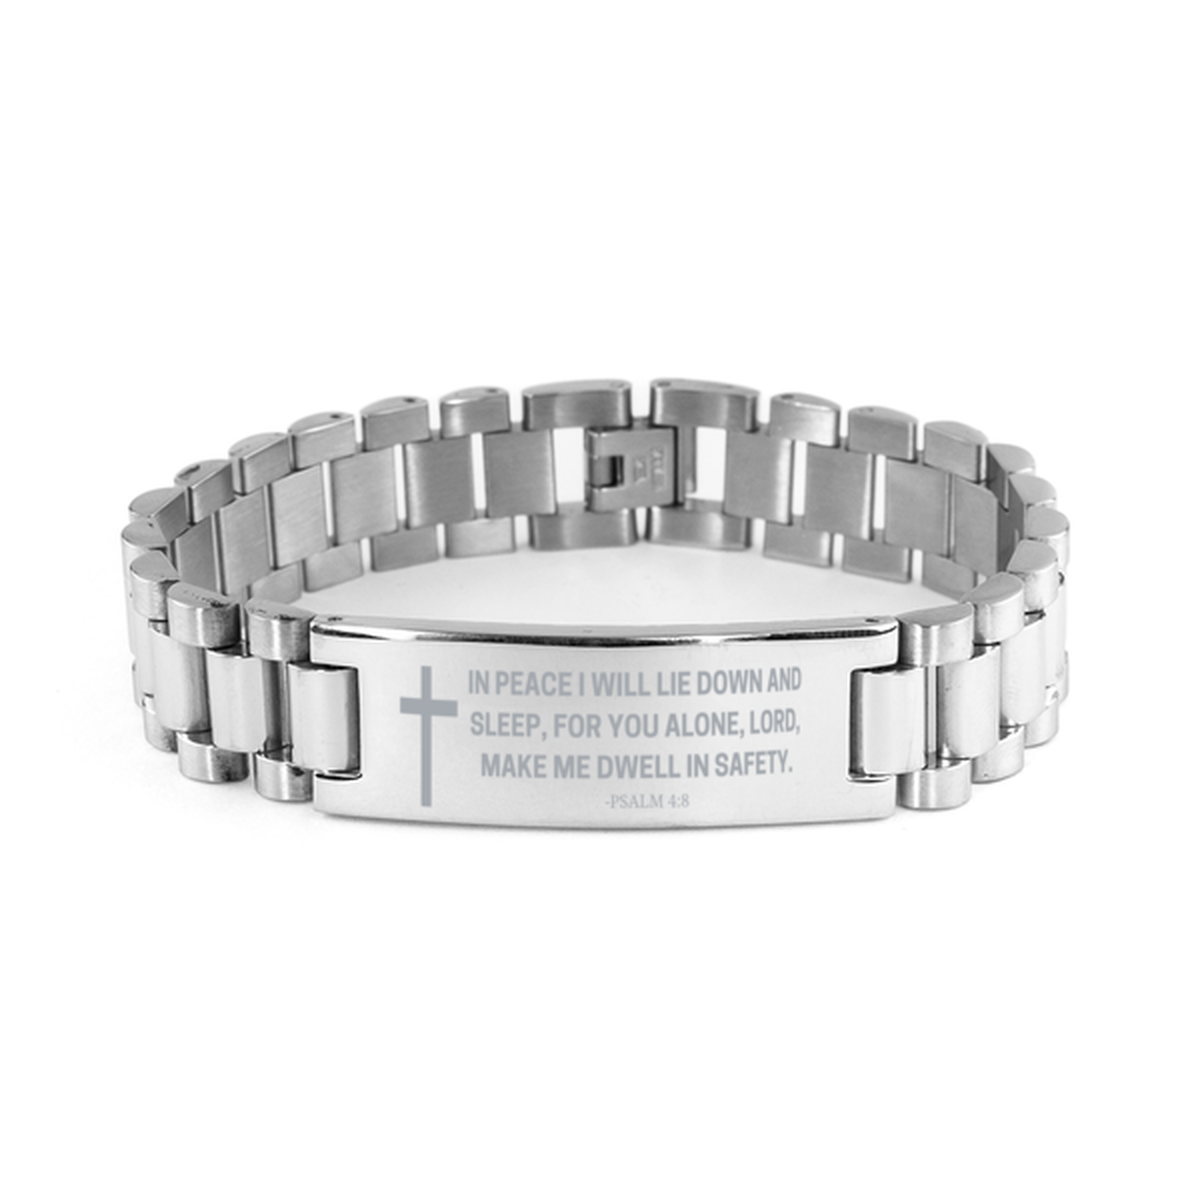 Baptism Gifts For Teenage Boys Girls, Christian Bible Verse Ladder Stainless Steel Bracelet, In peace I will lie down and sleep, Catholic Confirmation Gifts for Son, Godson, Grandson, Nephew